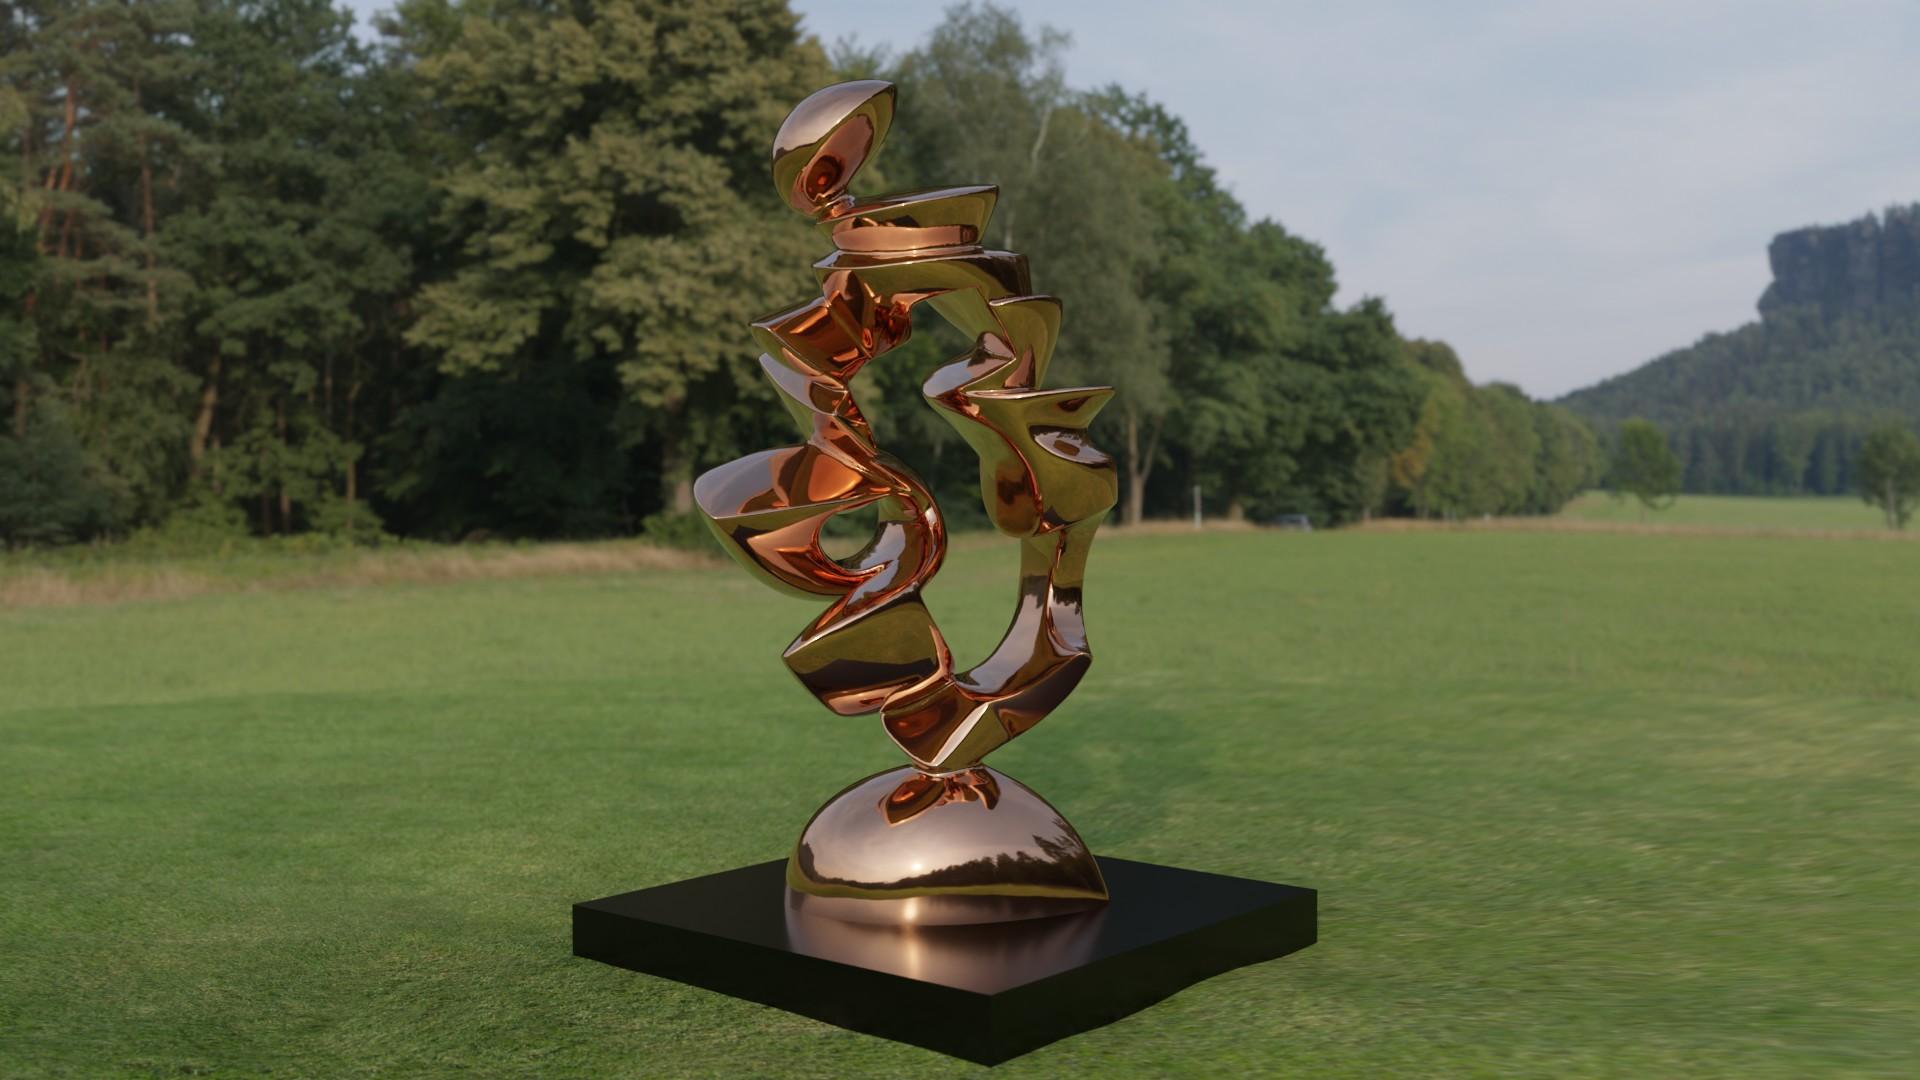 Expansion ( of the Heart ) - Abstract Sculpture by Jan Willem Krijger